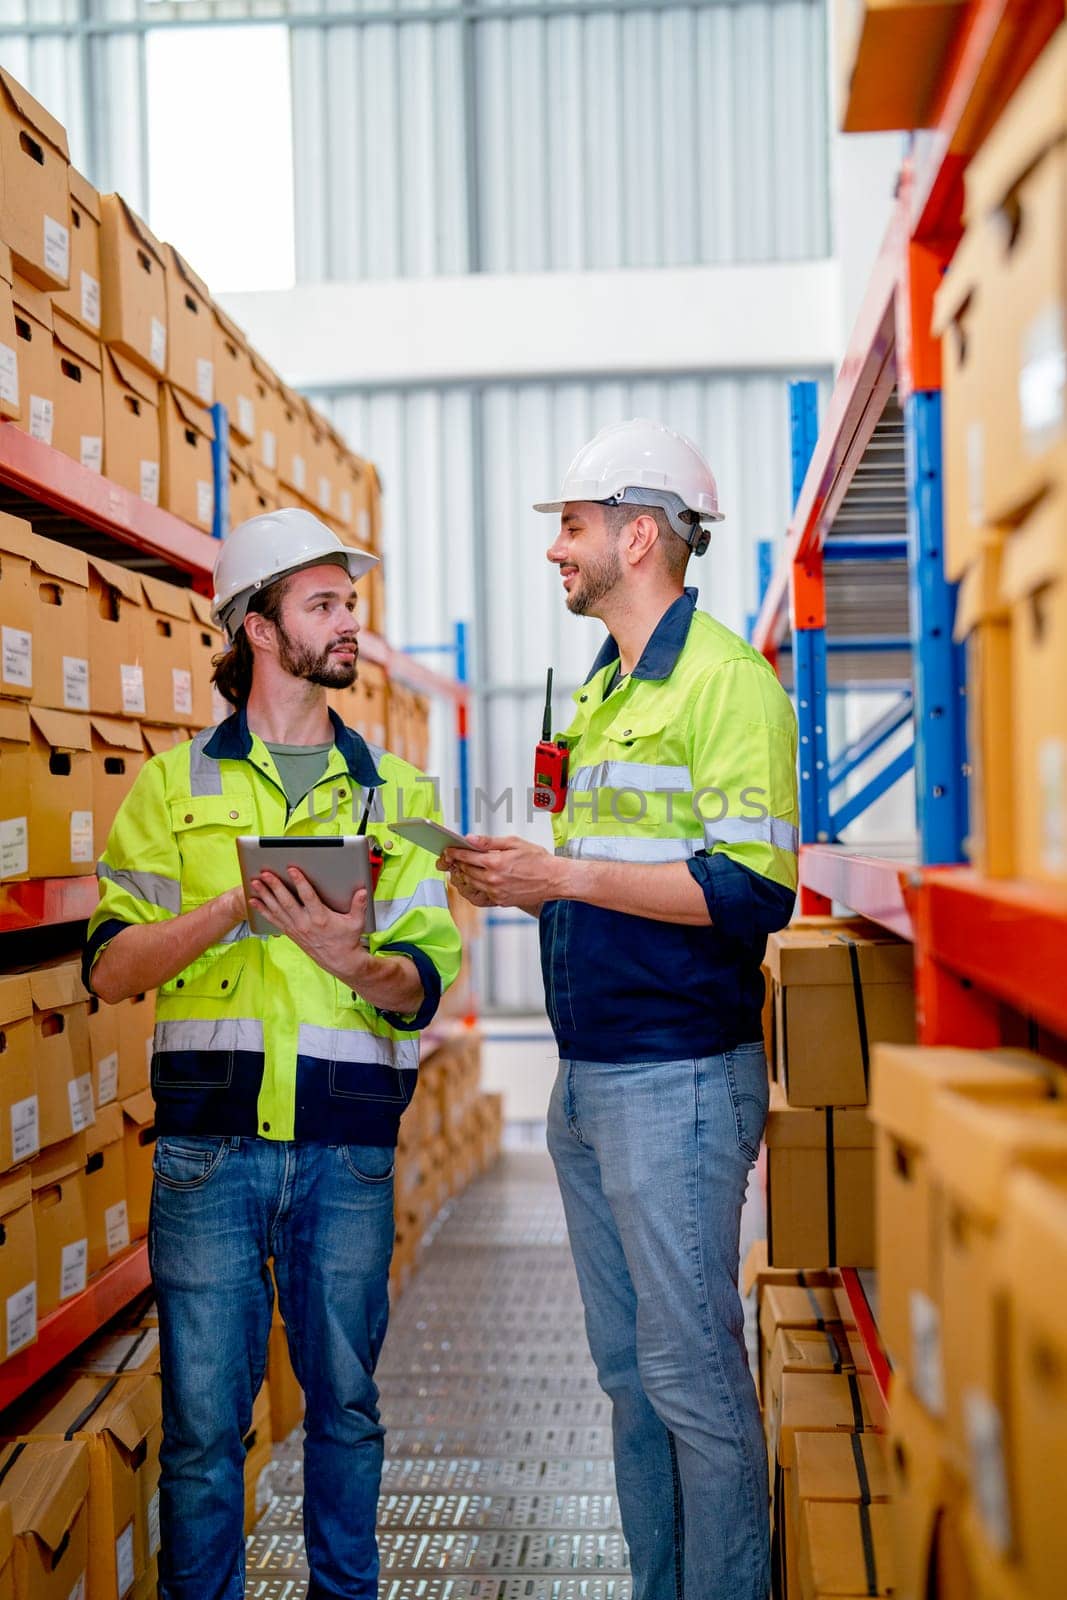 Two professional warehouse workers stand between shelves of products and discuss together about work in workplace area. The concept of good system support the worker for stock and shipment industry. by nrradmin